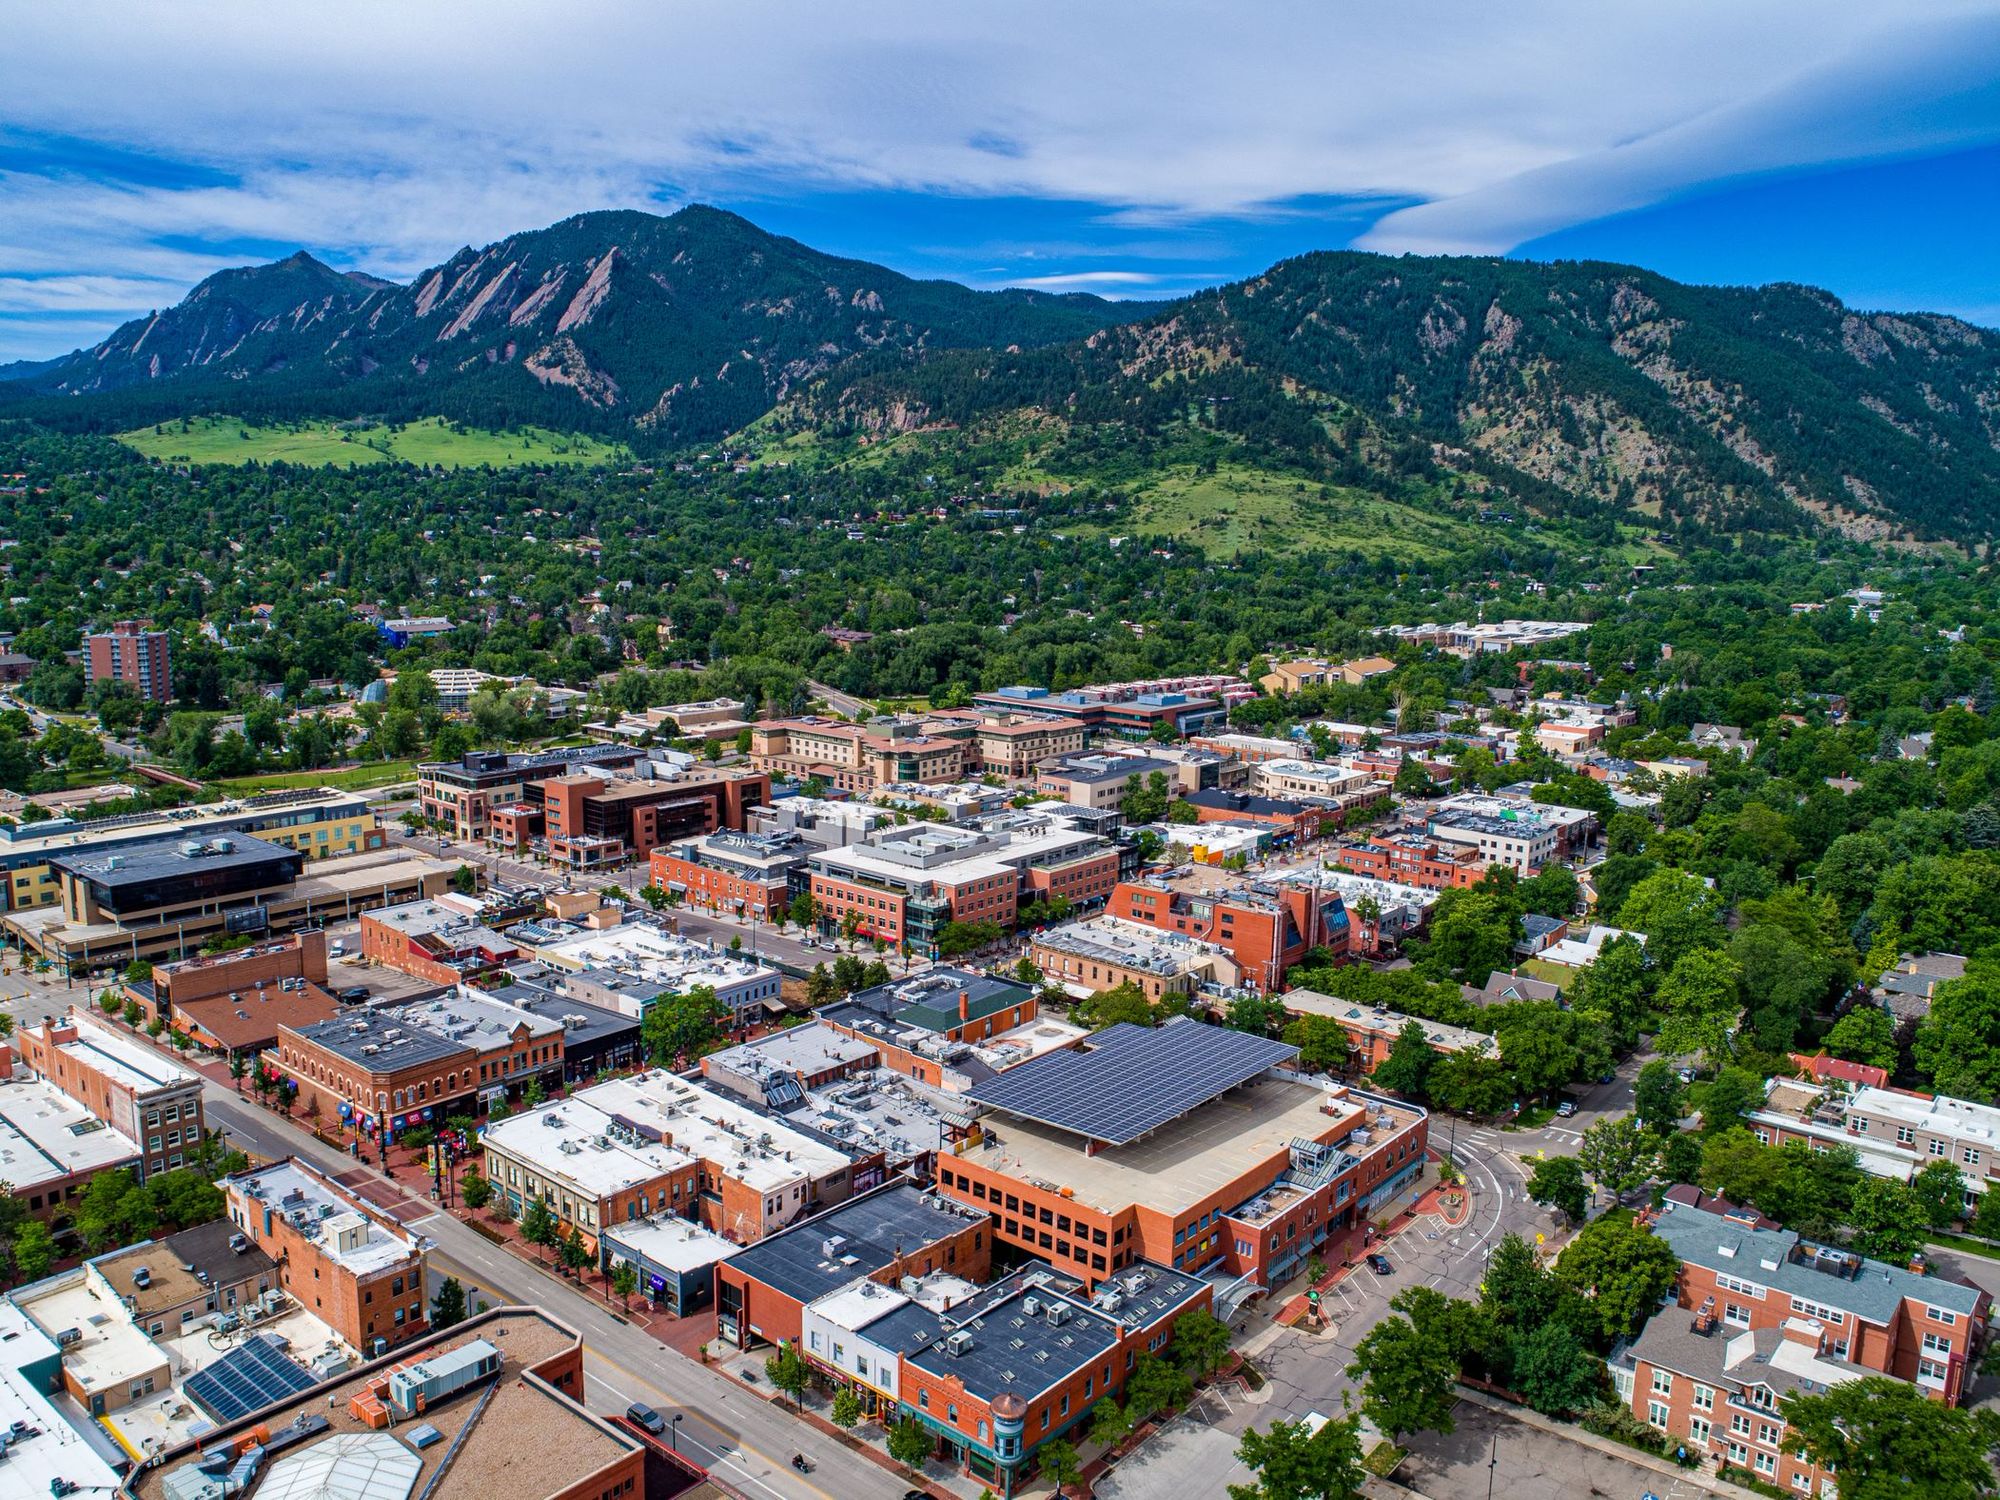 Hire .NET Developer in Boulder, CO for your next project